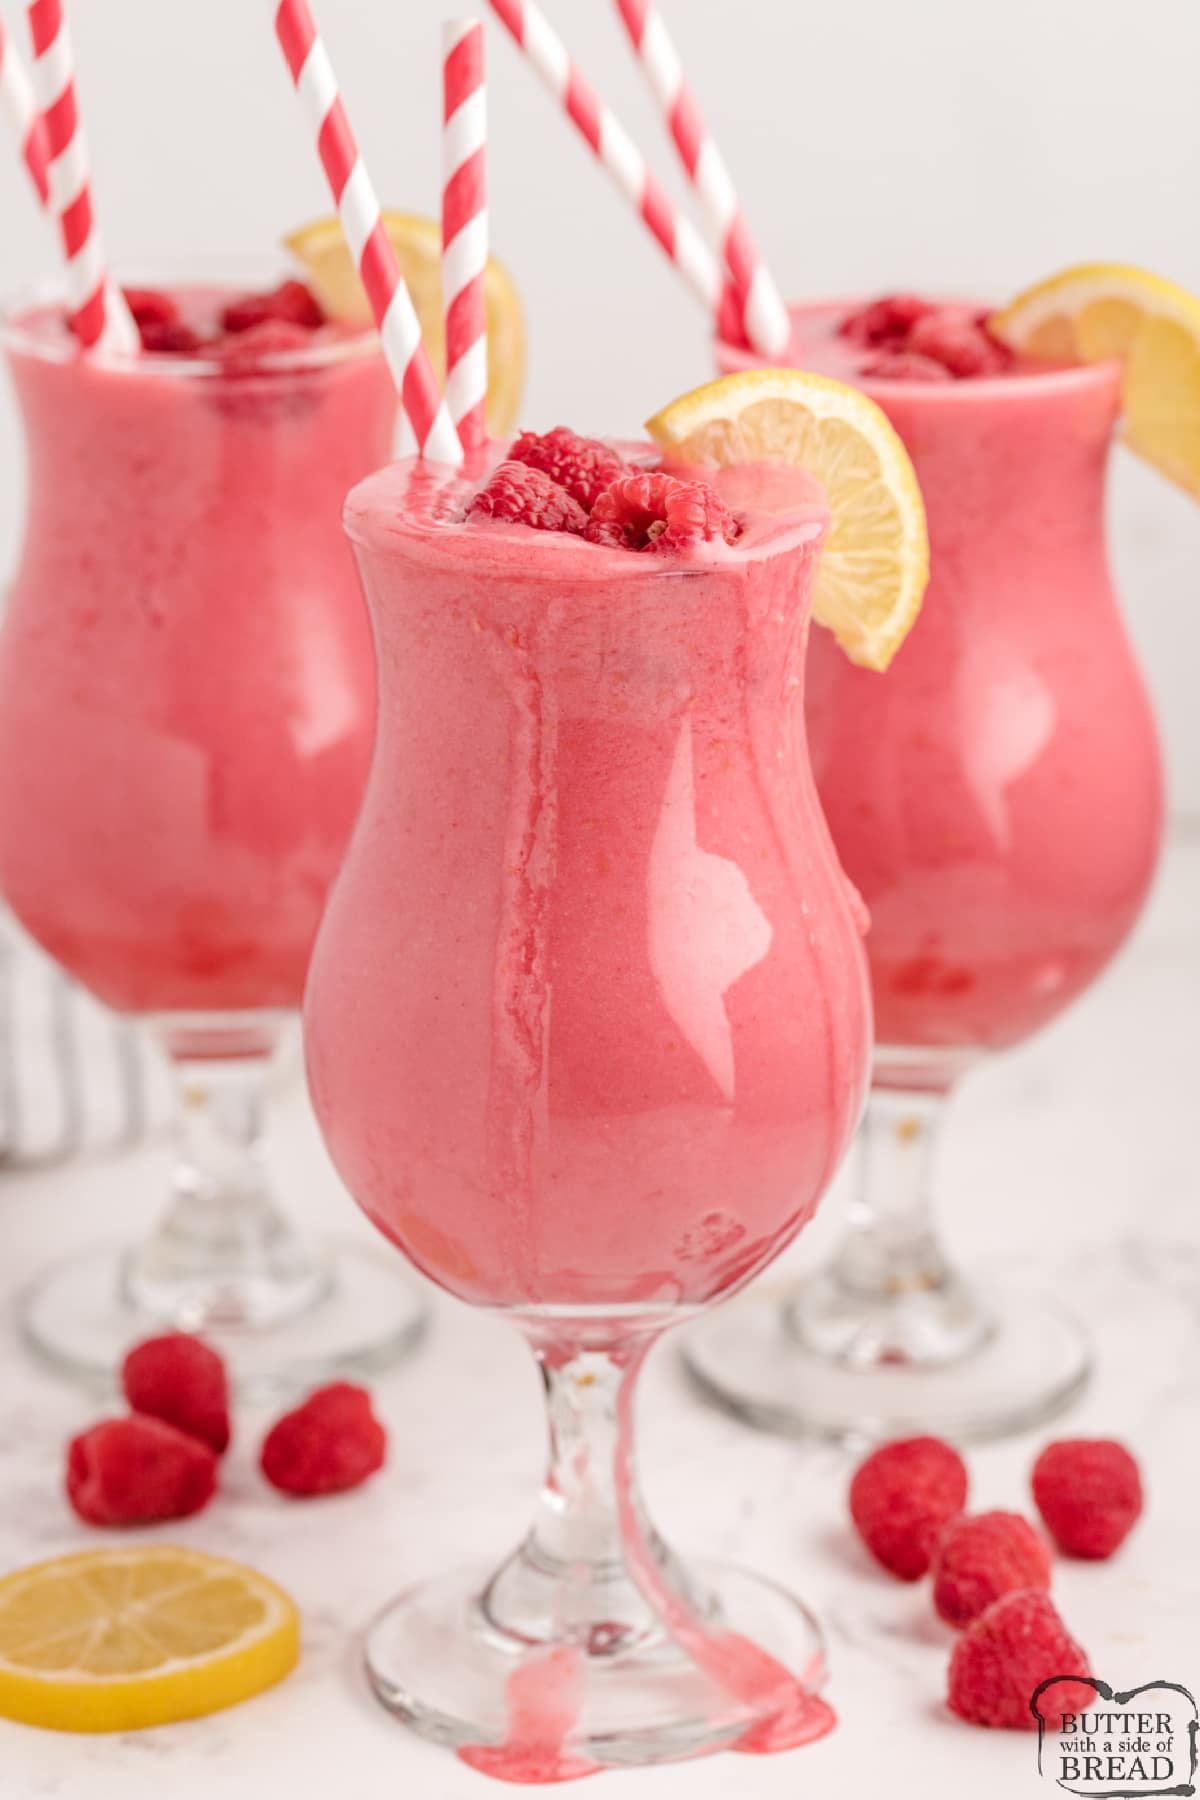 Lemon Raspberry Smoothie is a light and refreshing treat made with only 4 ingredients! This raspberry lemonade smoothie is loaded with delicious flavor and made in less than 5 minutes! 